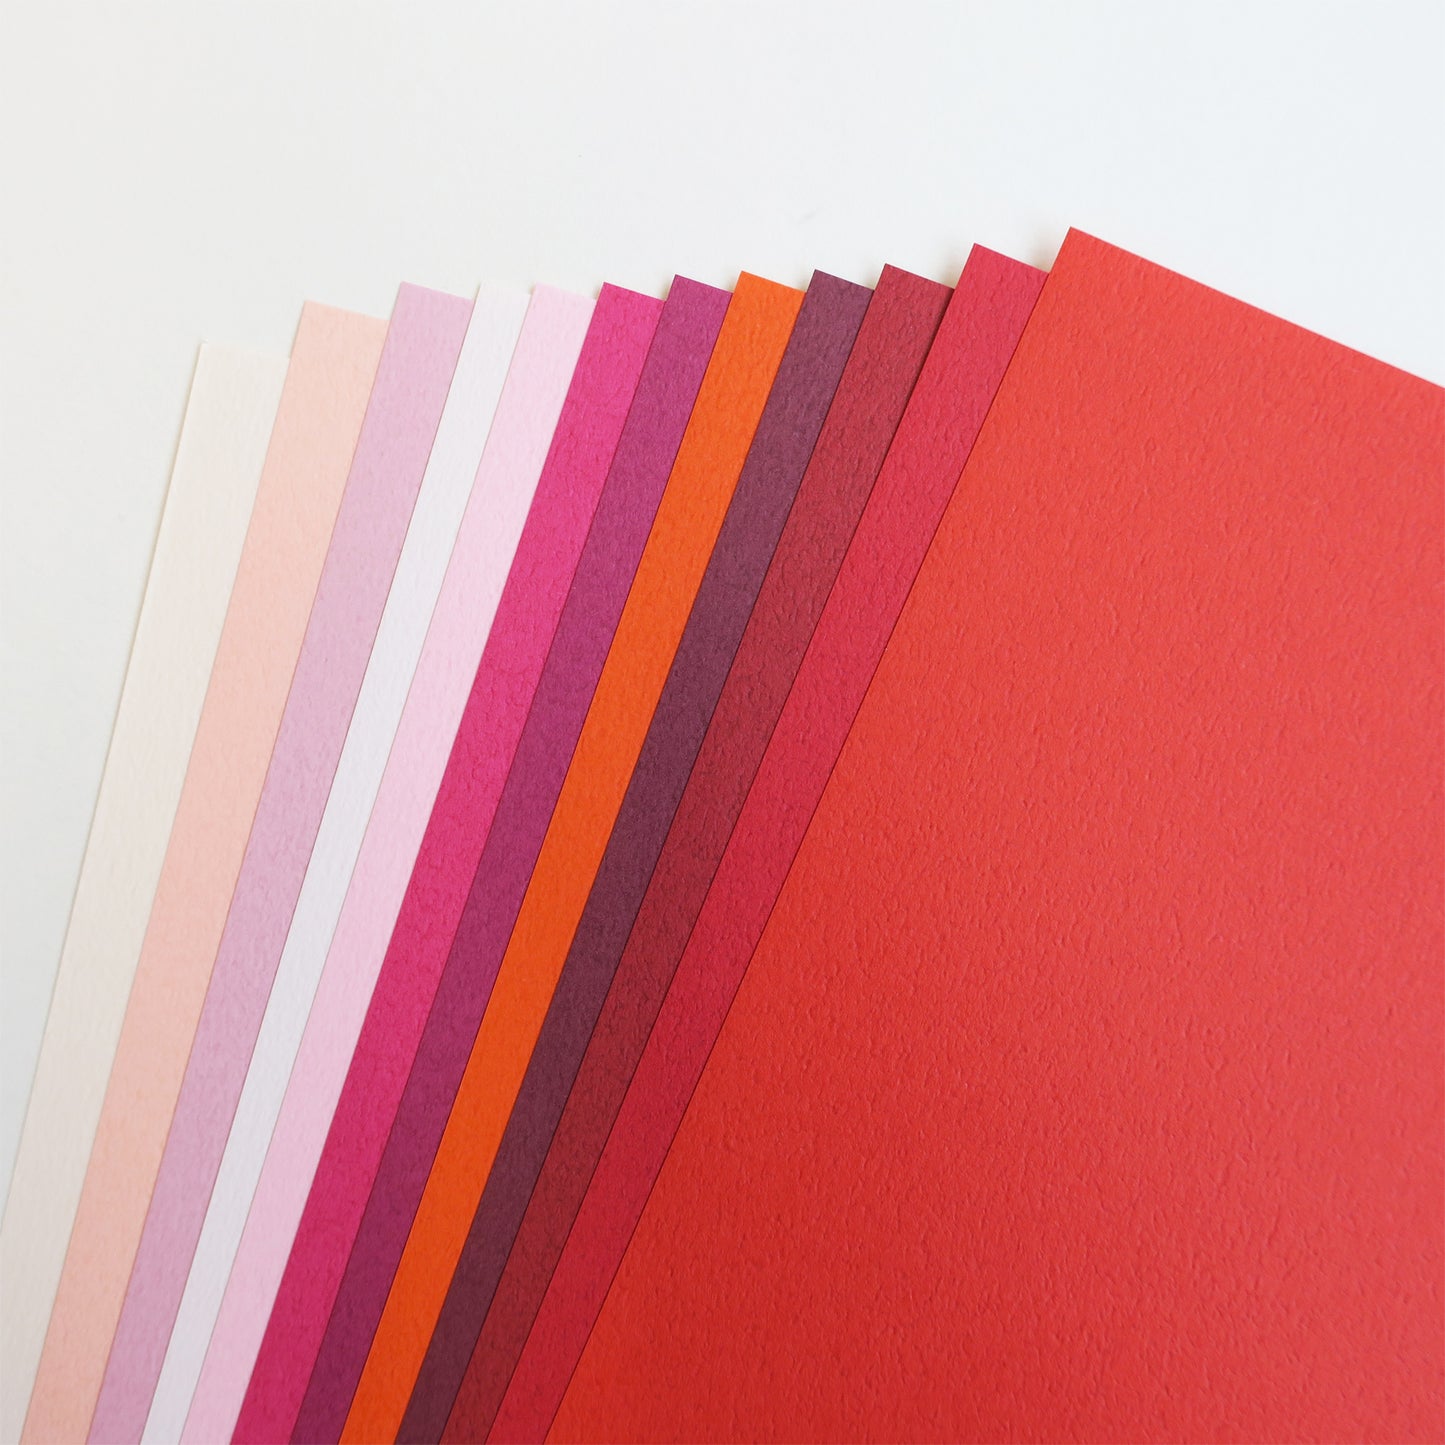 Toyo Tant Paper, 12 colours of Red Themed Origami Paper Pack, 35x35cm